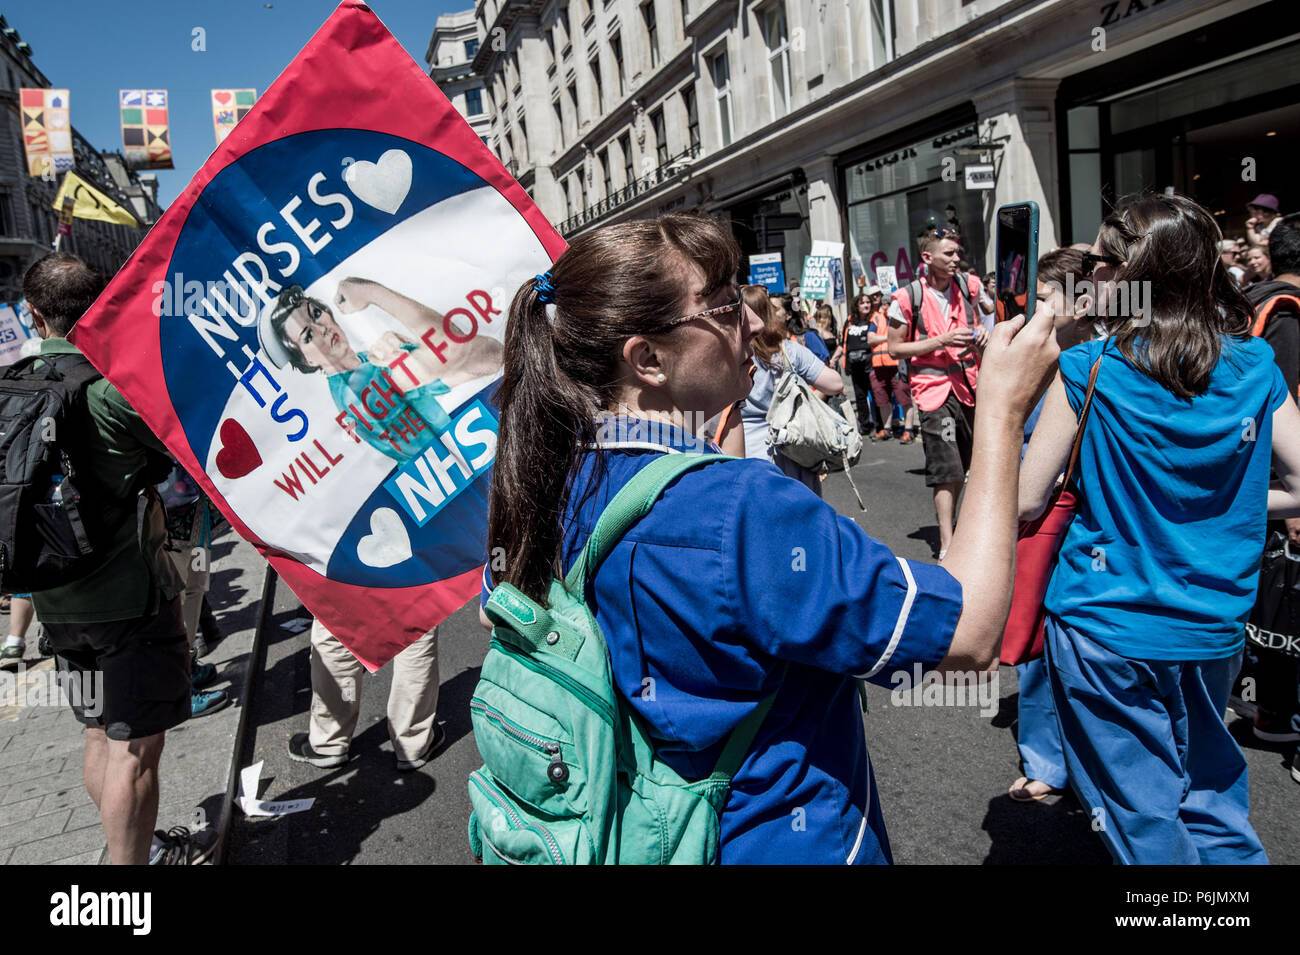 A woman with a poster of nurses of the NHS. Tens of thousands of people marched during the hot Saturday weather through London to celebrate and demonstrate over Britain's National Health Service (NHS), ahead of its 70th birthday next week. Stock Photo